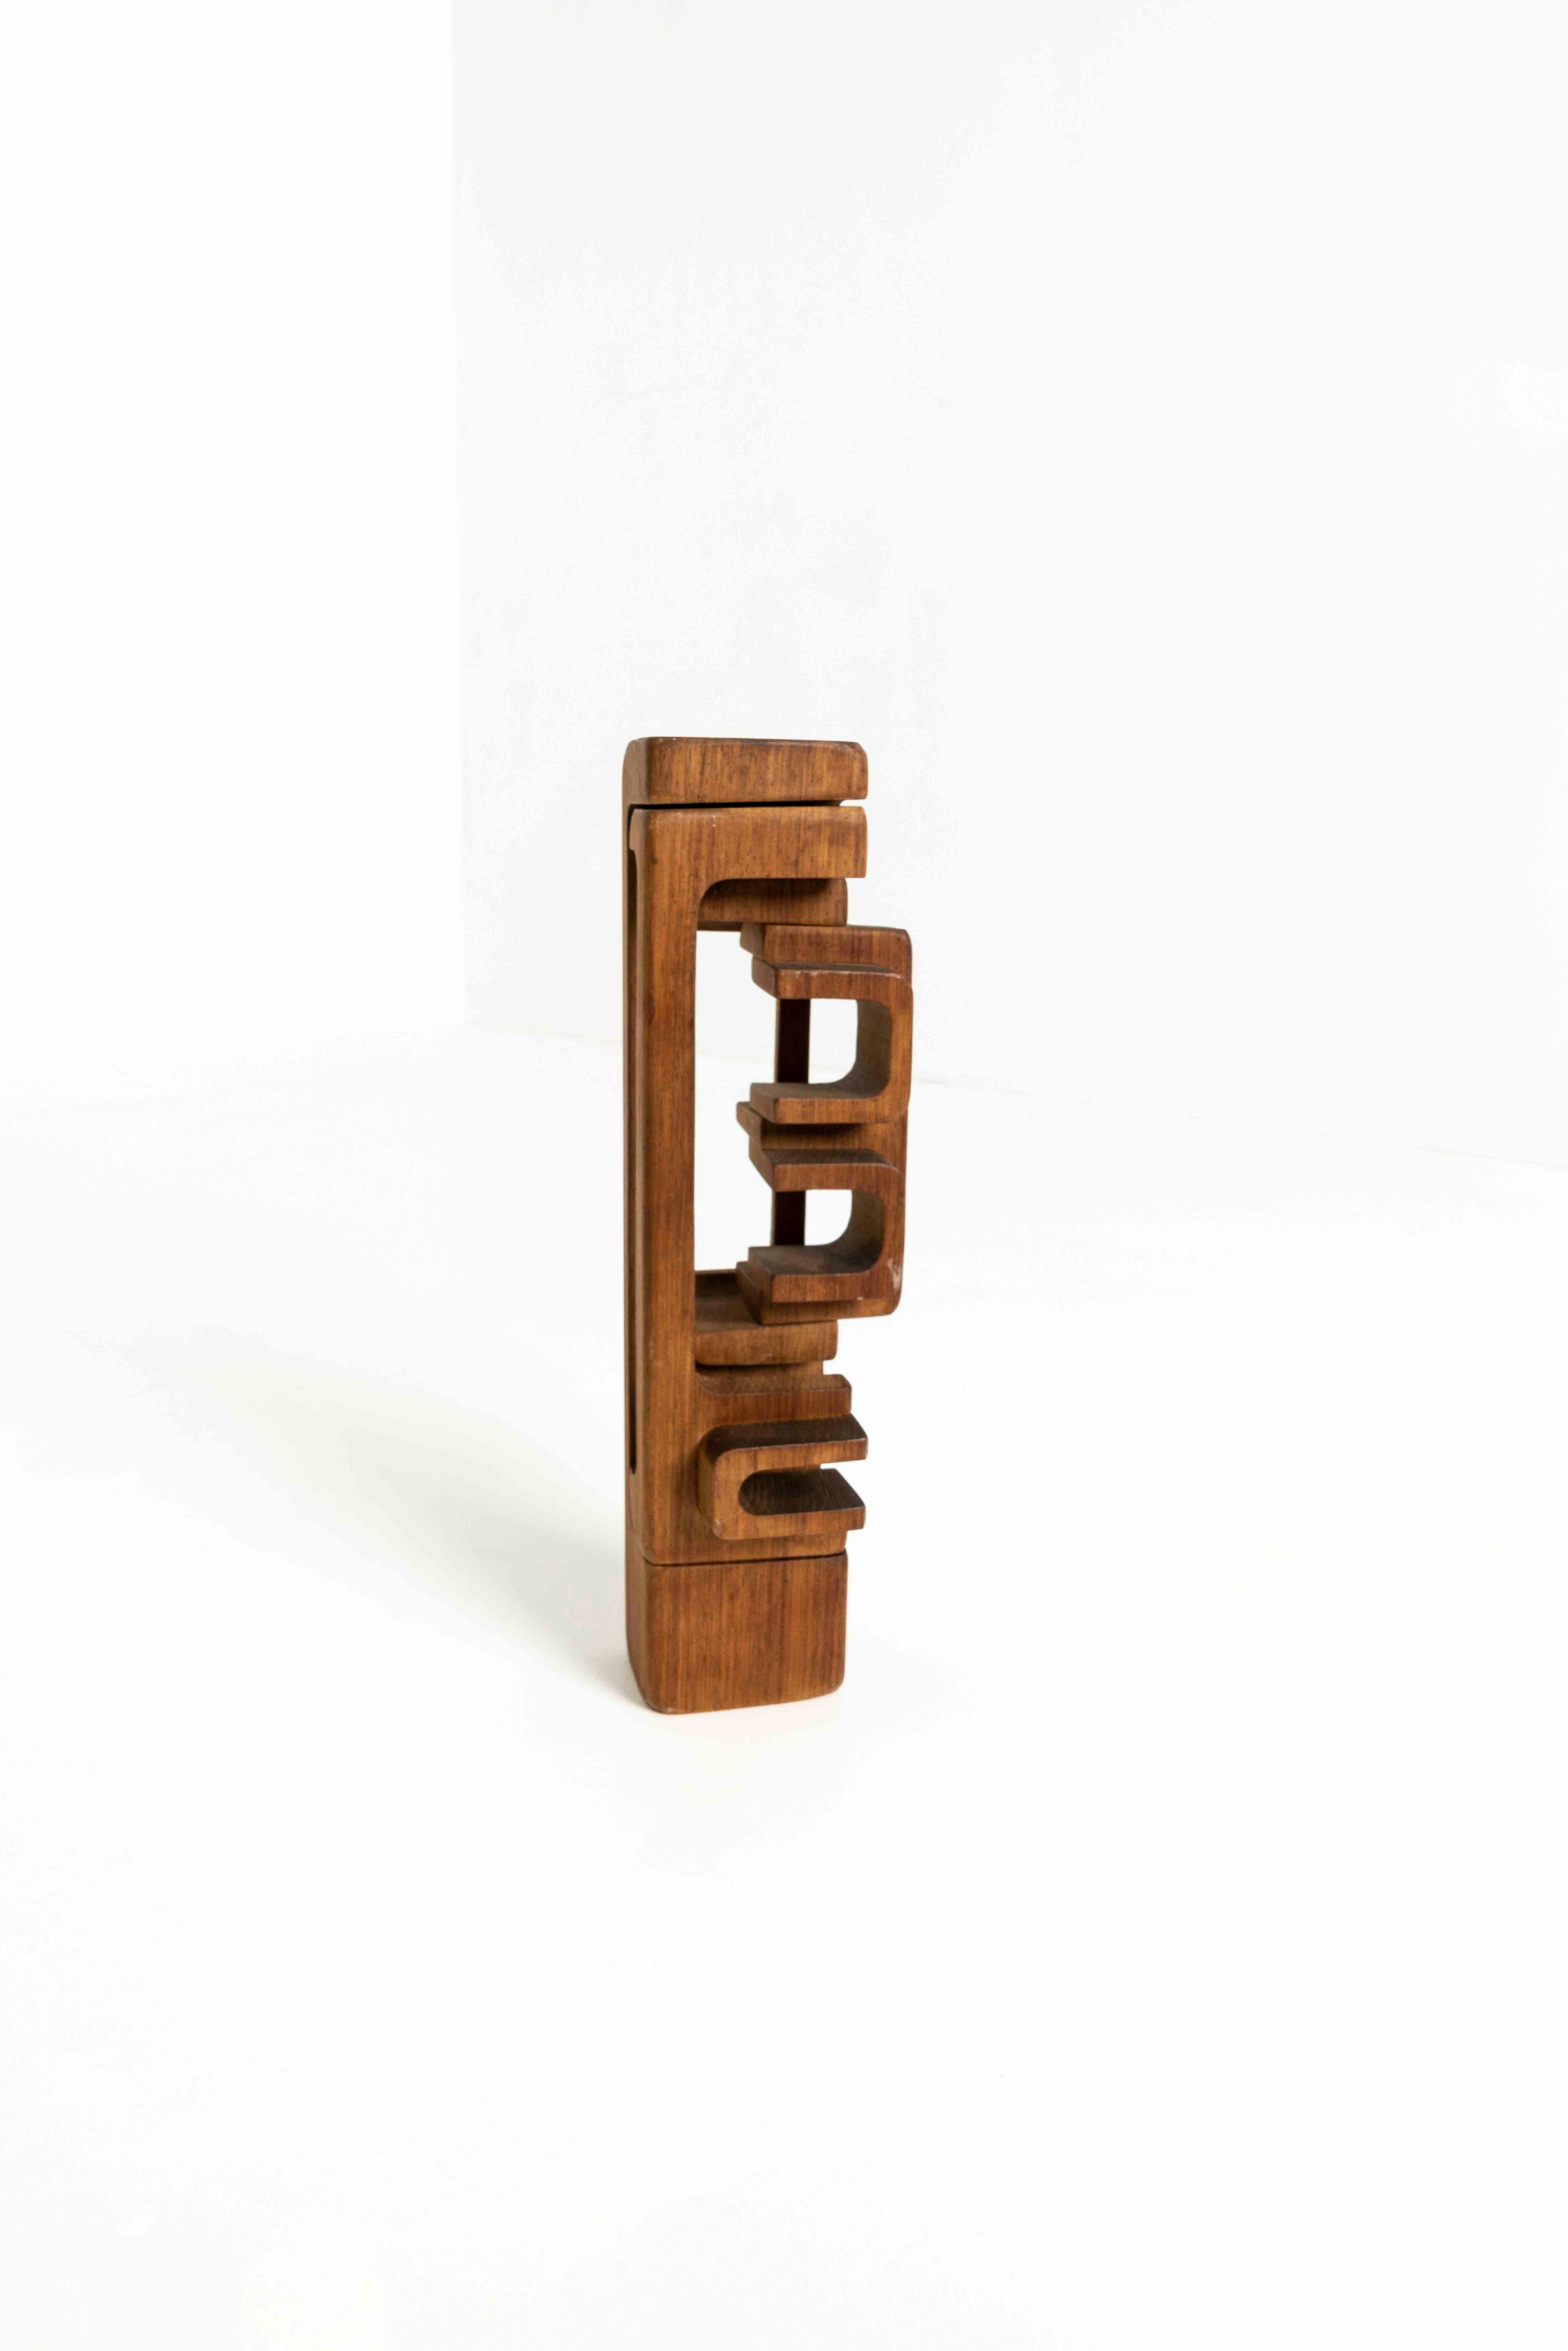 Mid-Century Modern Abstract Carved Wooden Sculpture by Brian Willsher, 1976 UK